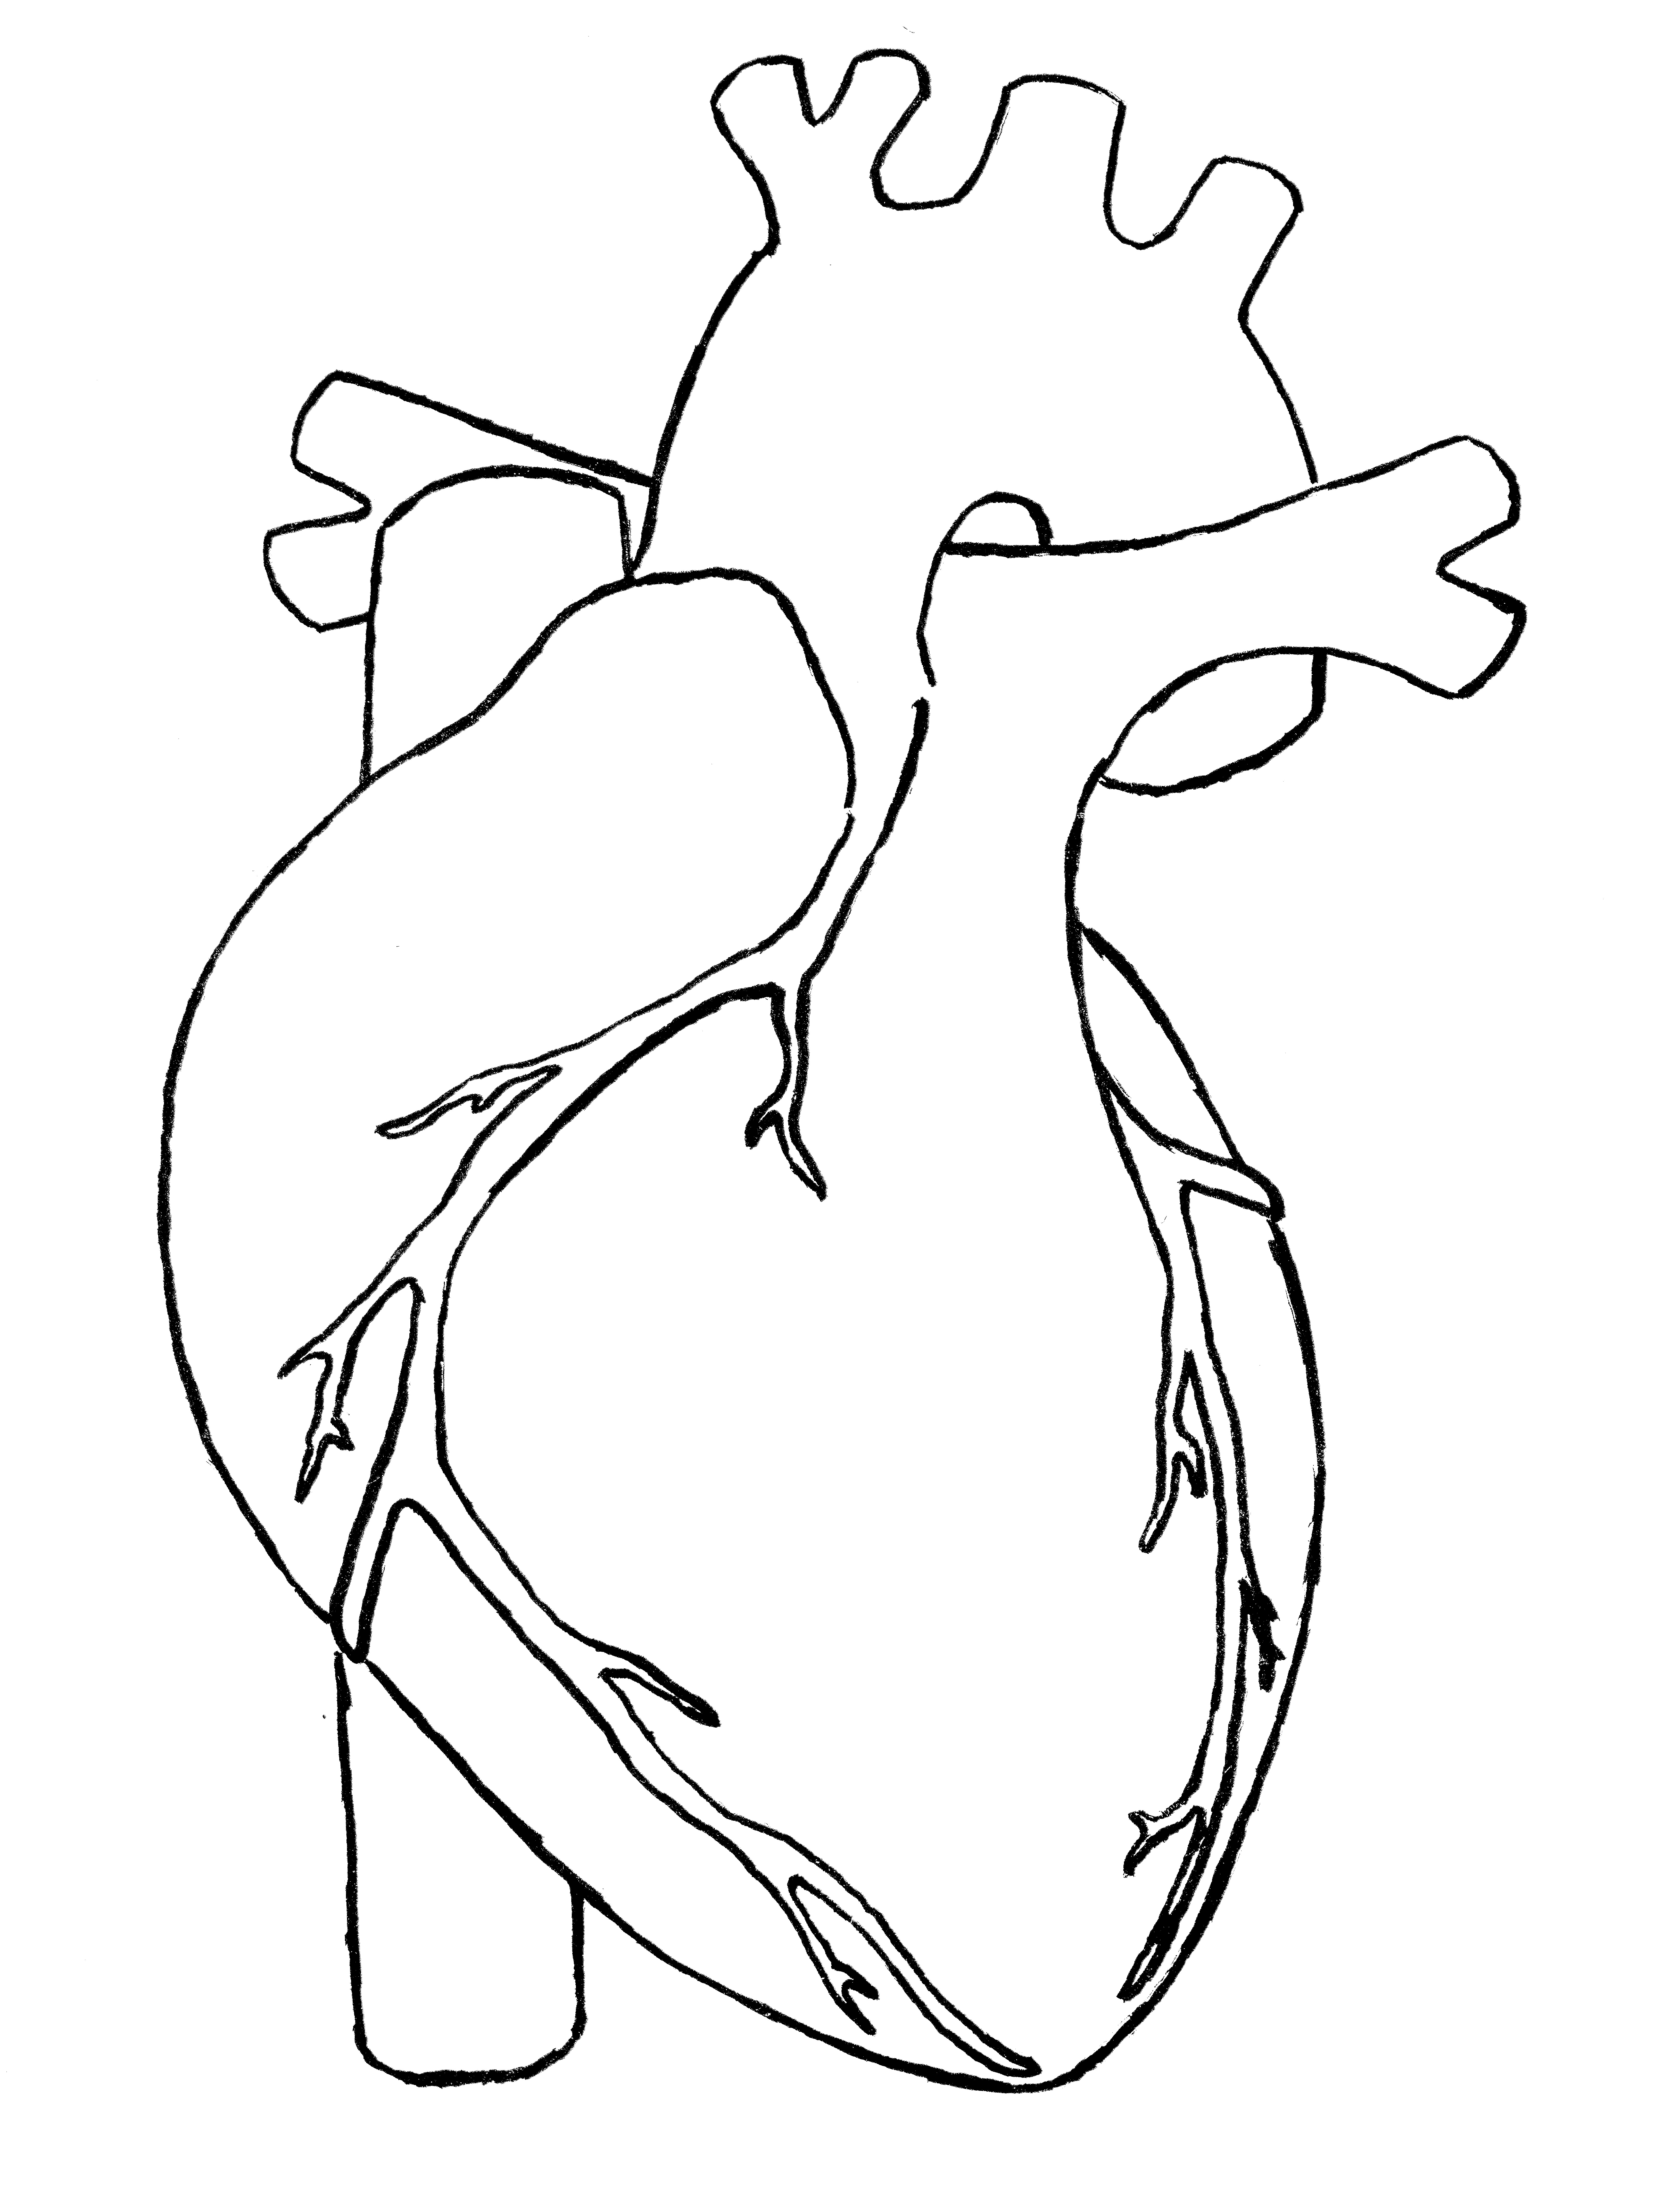 Drawing Of Heart - ClipArt Best